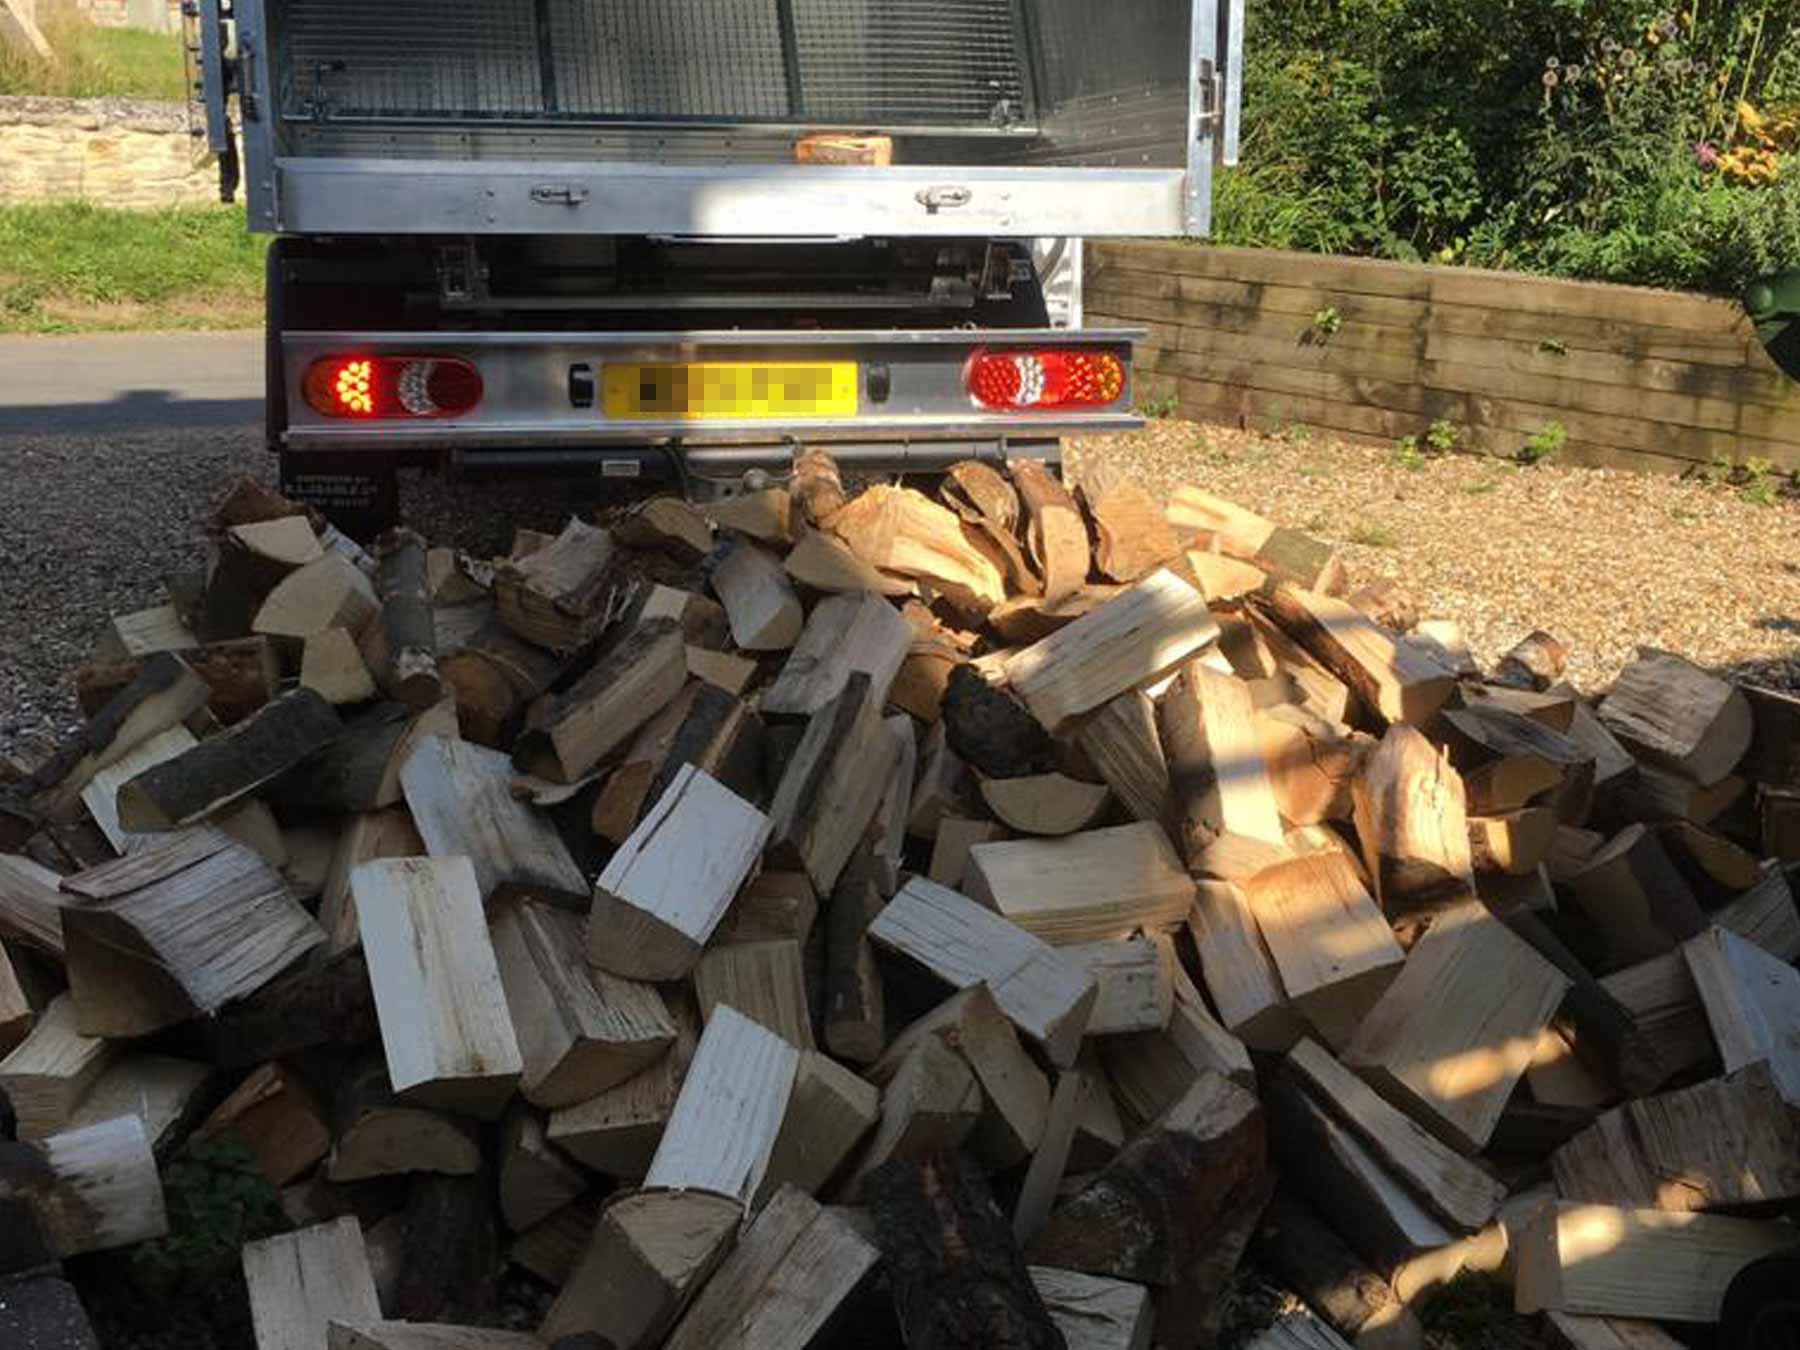 Our new truck delivering firewood